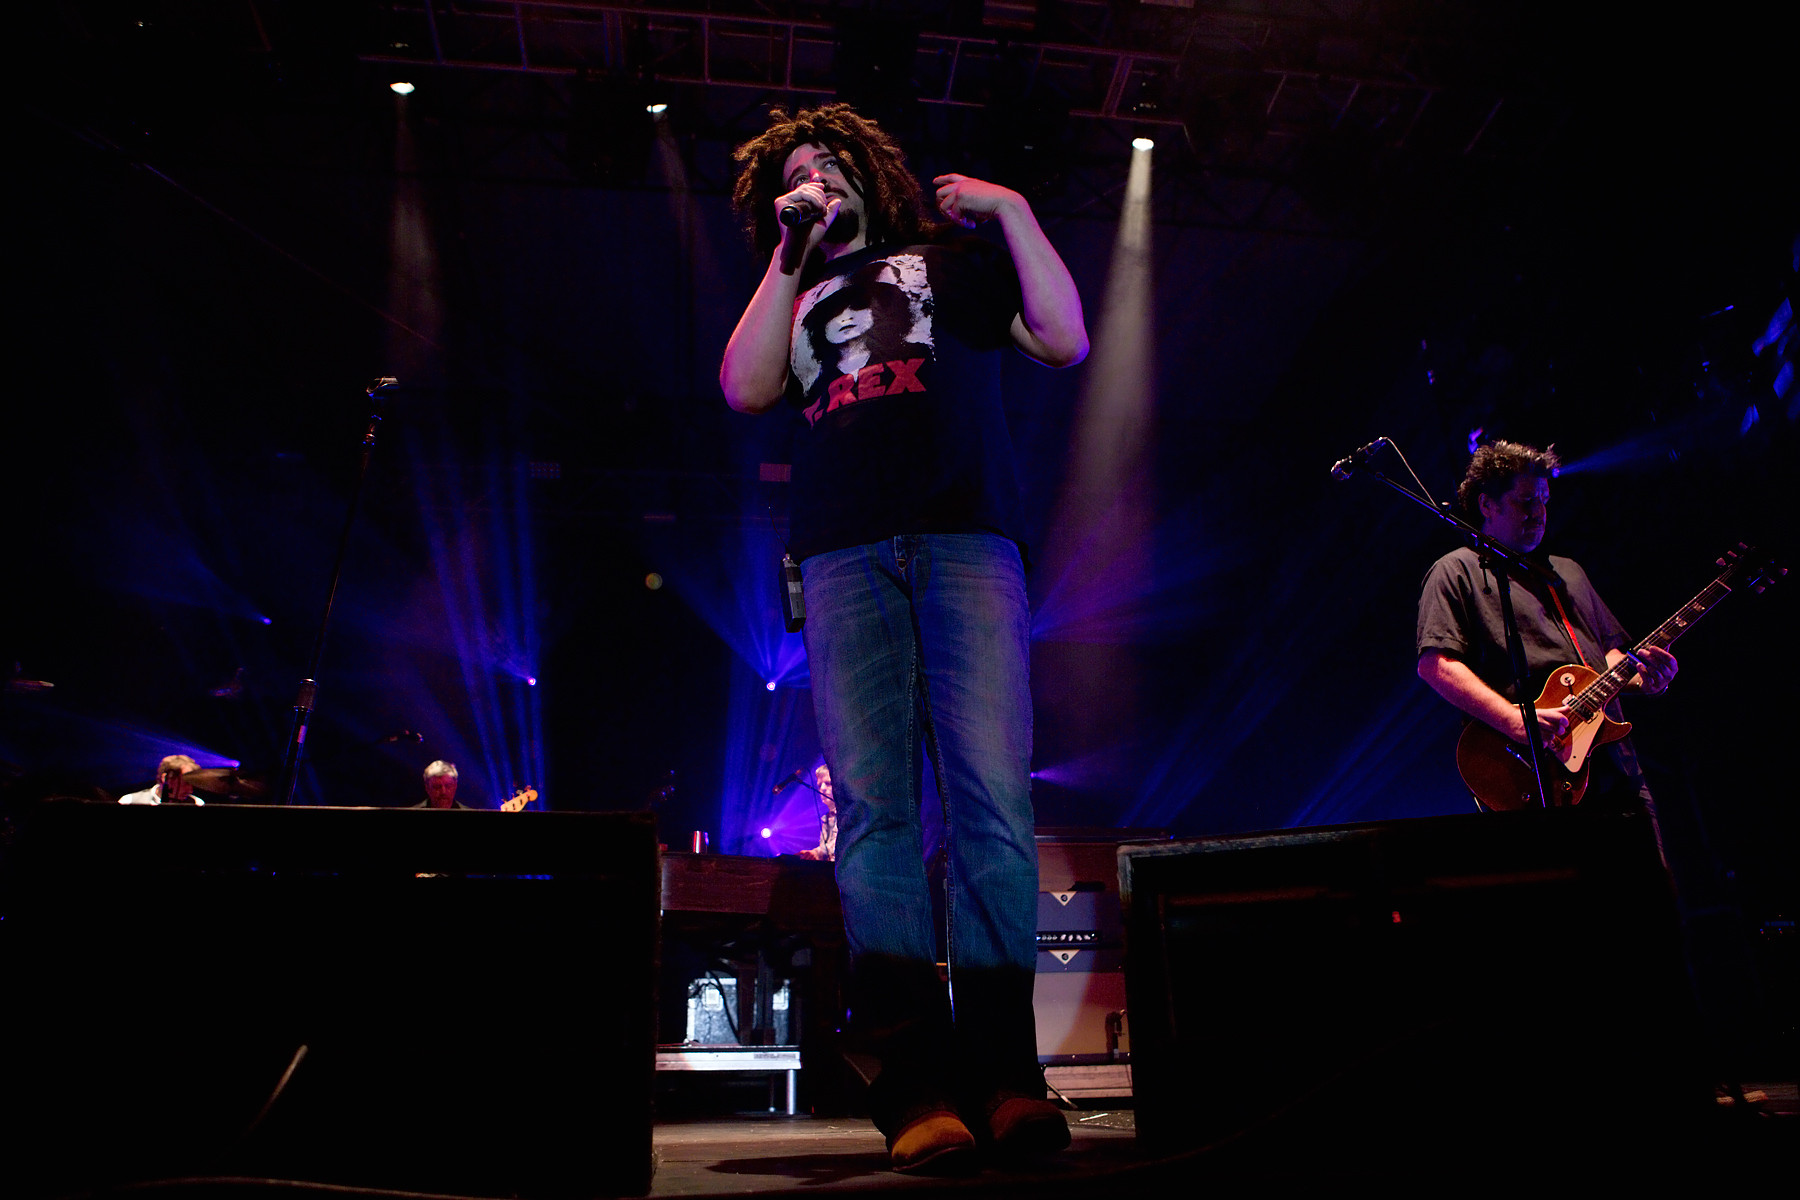 Counting Crows @ Echo Beach